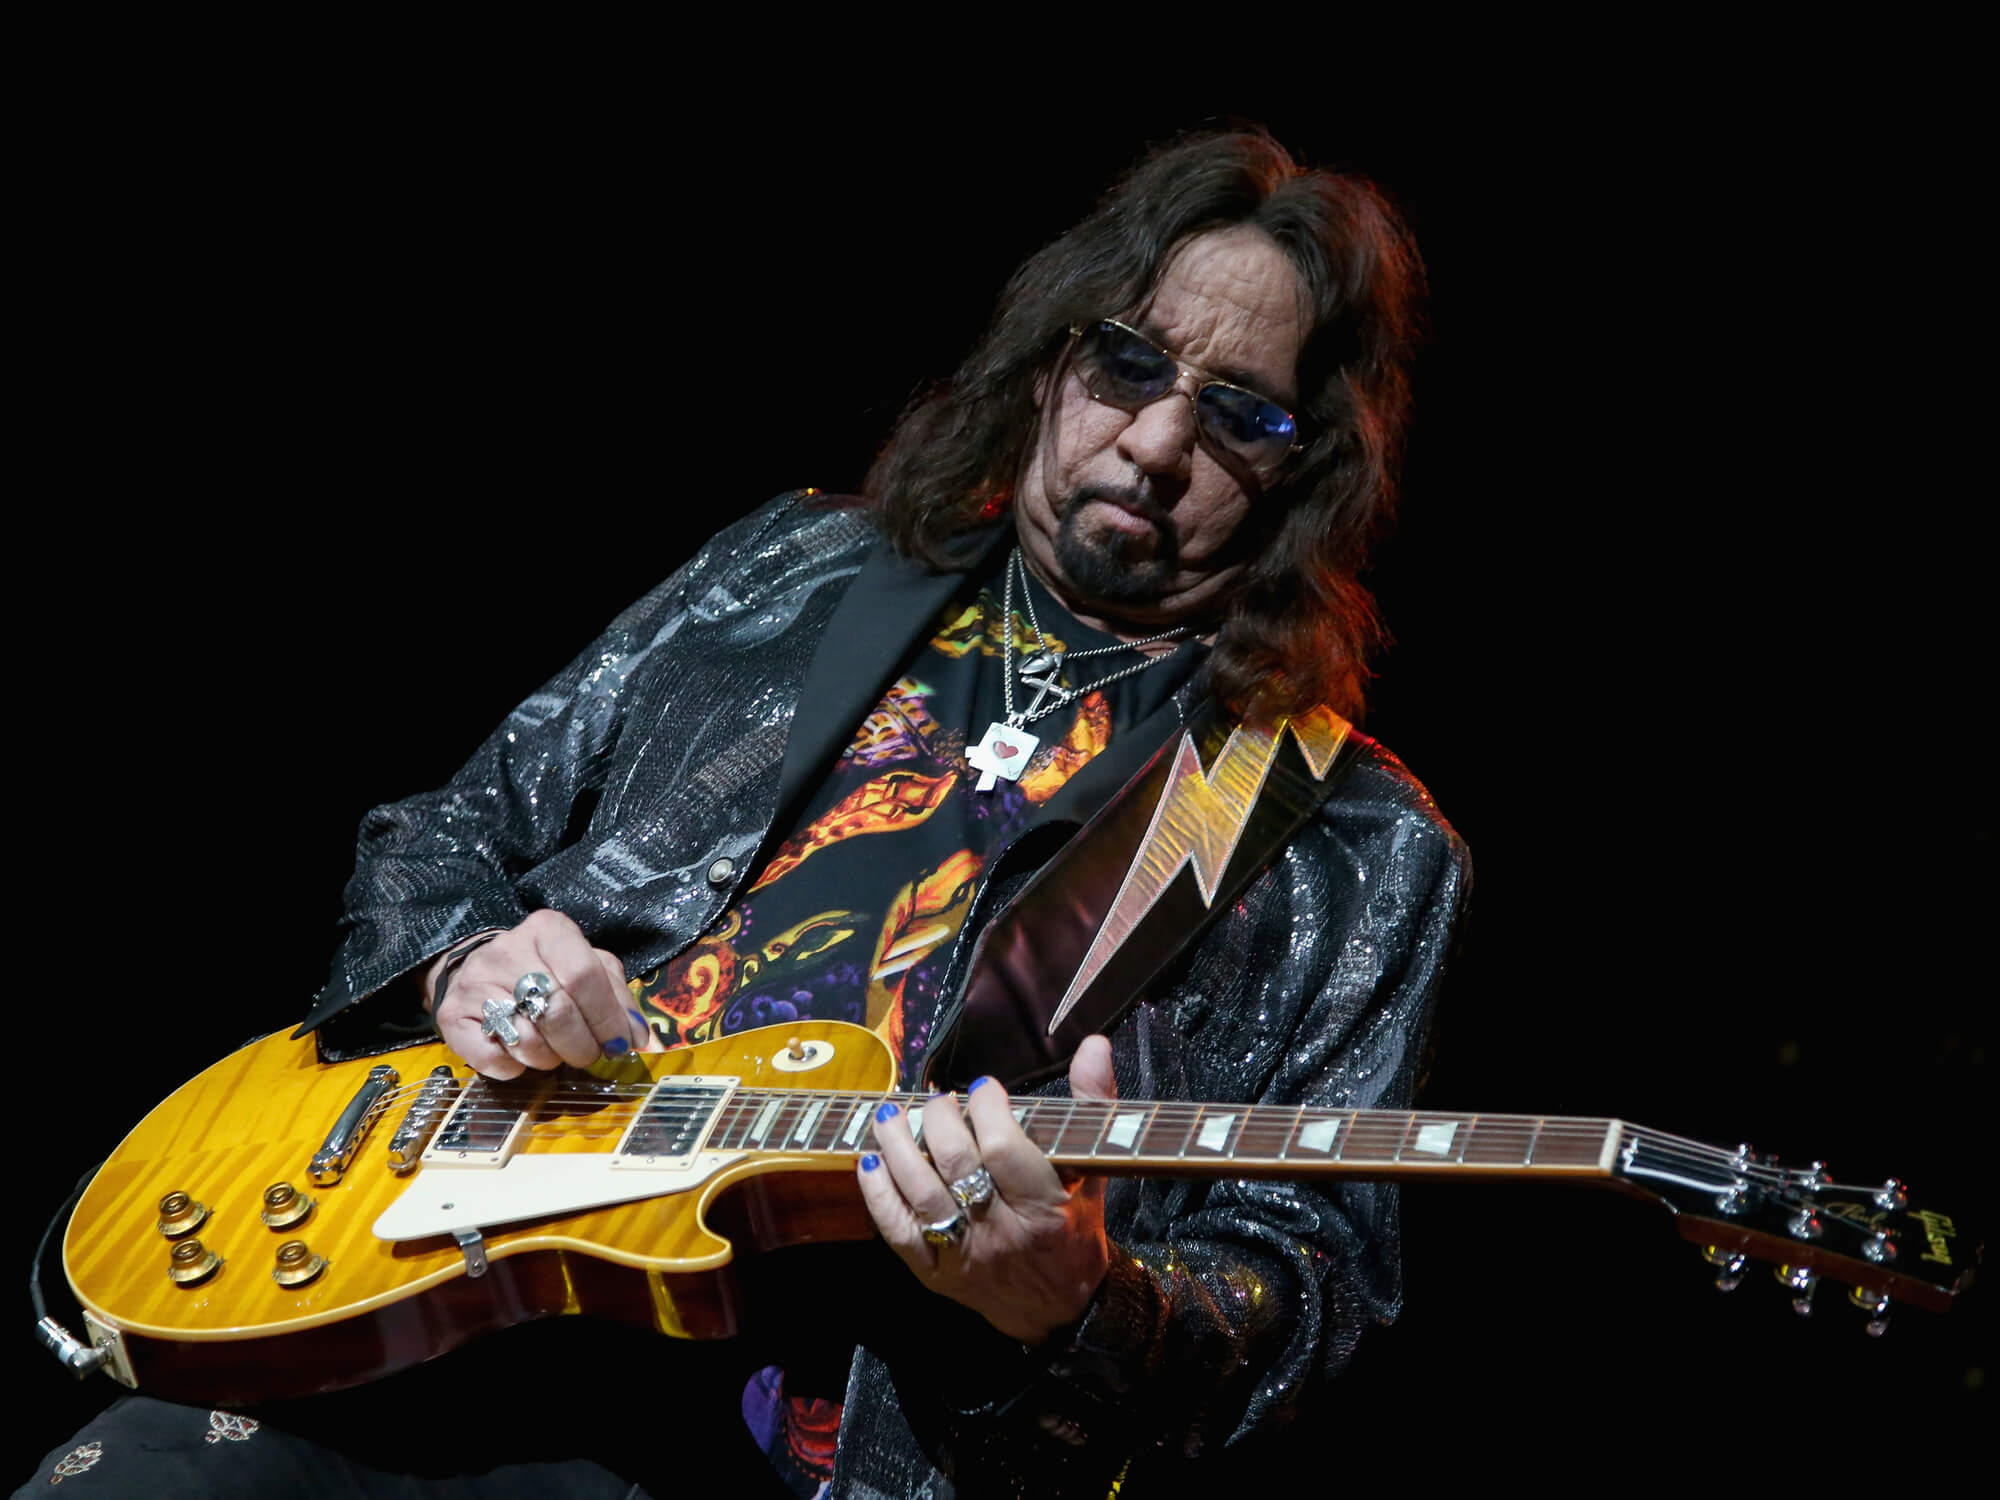 Ace Frehley performs